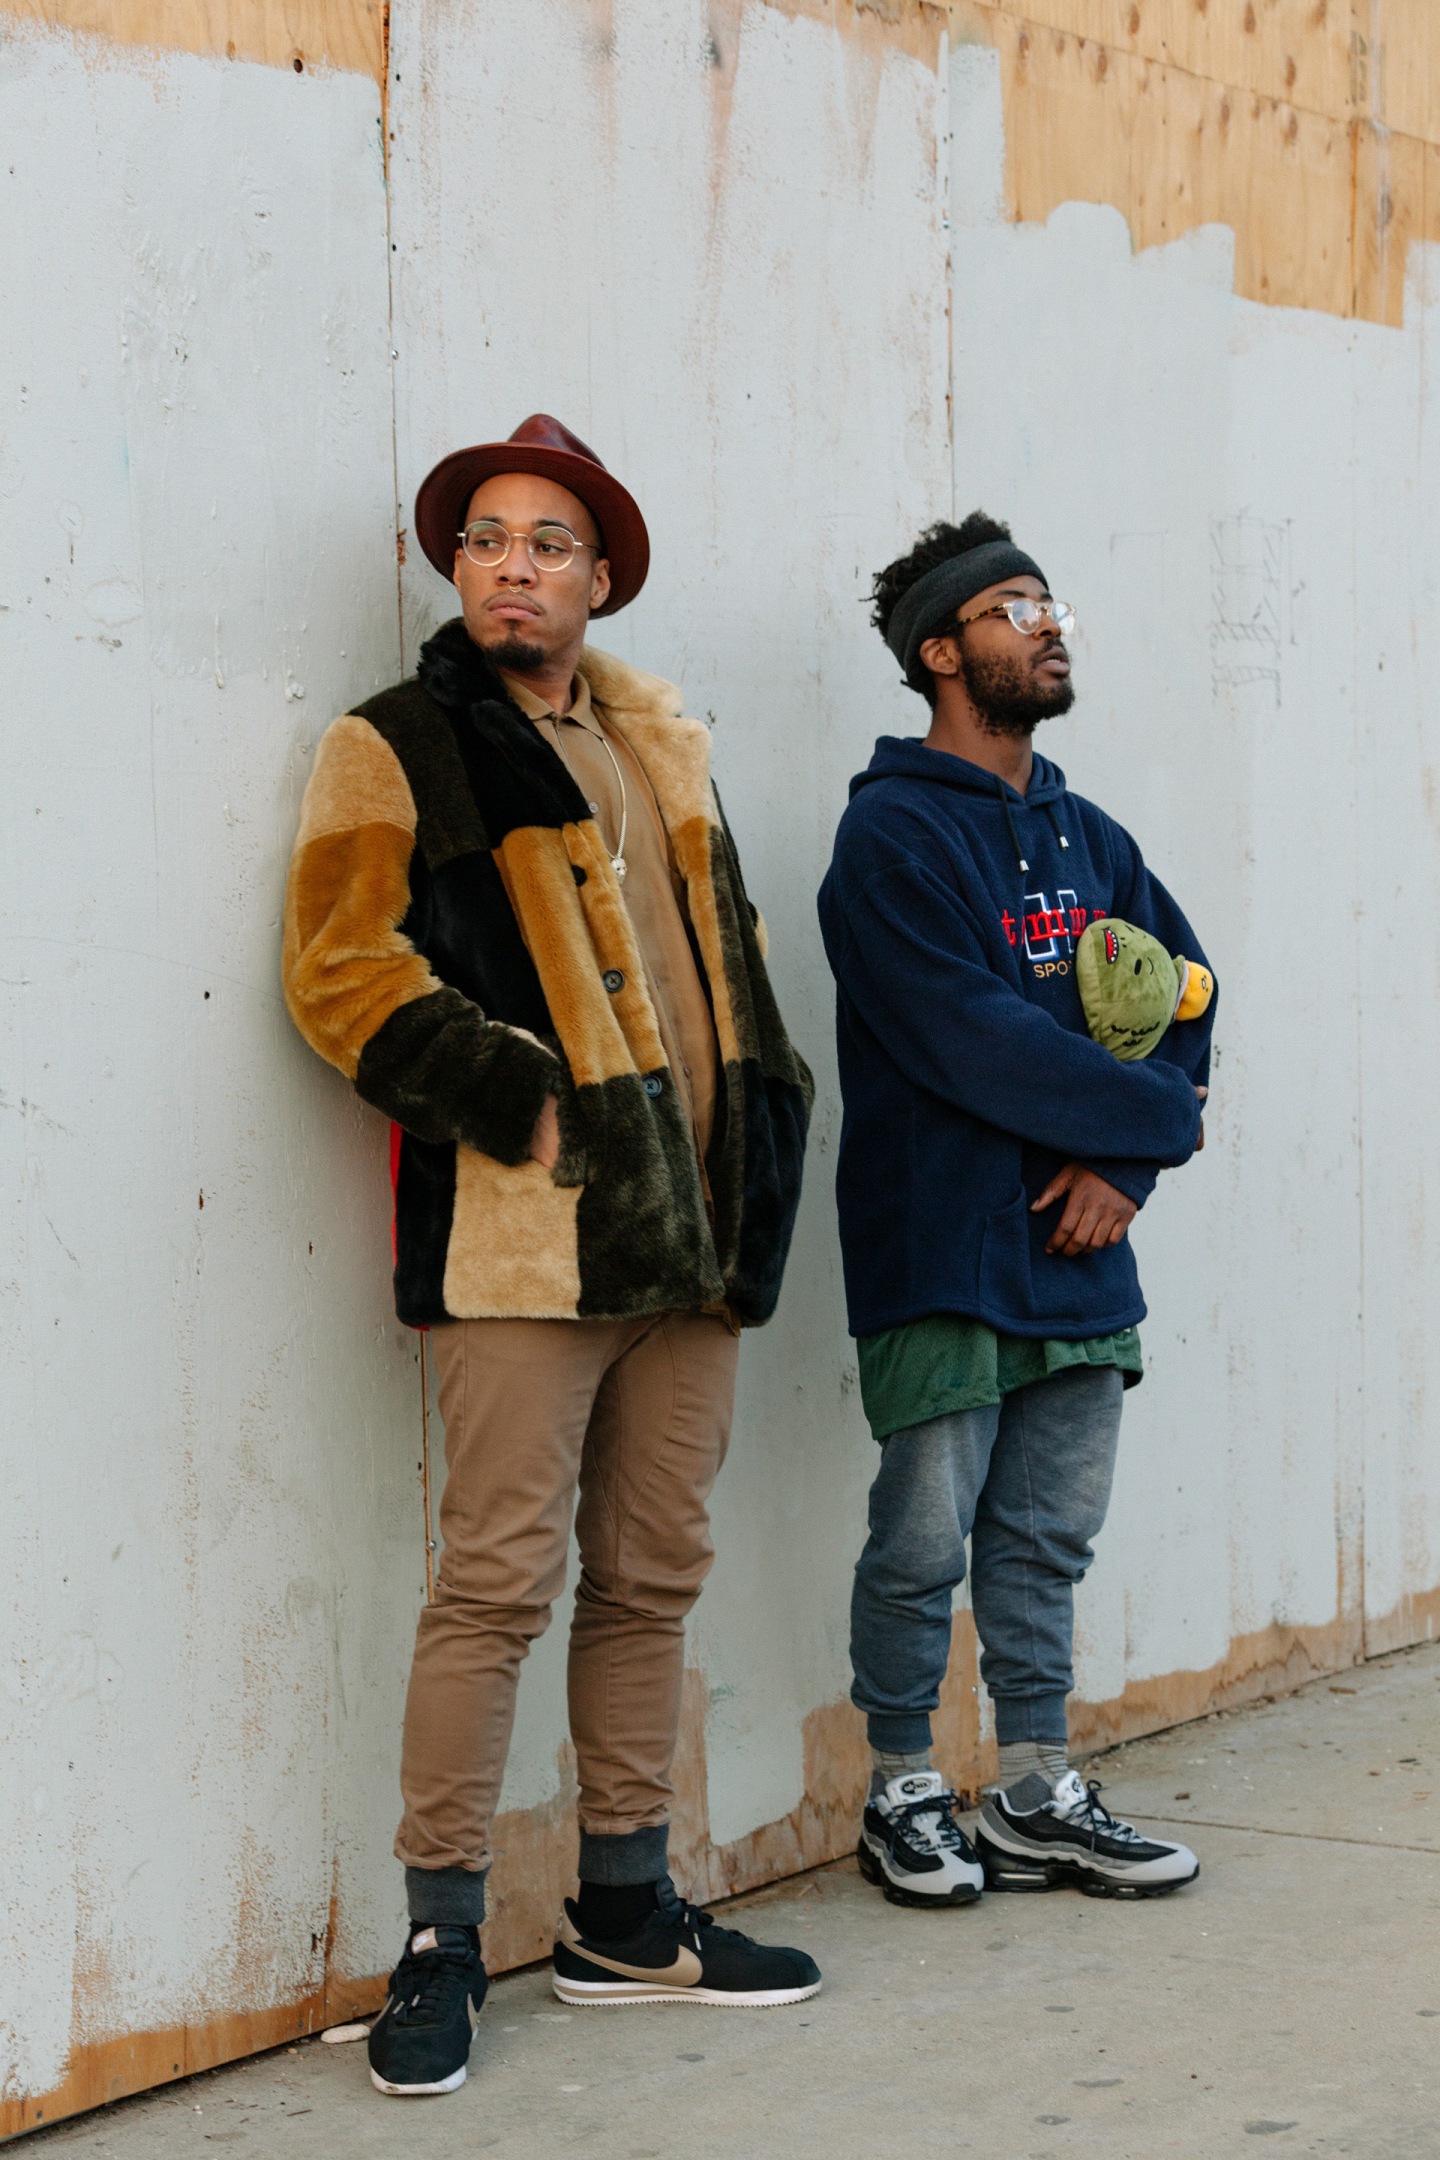 NxWorries Just Want The Music To Speak For Them